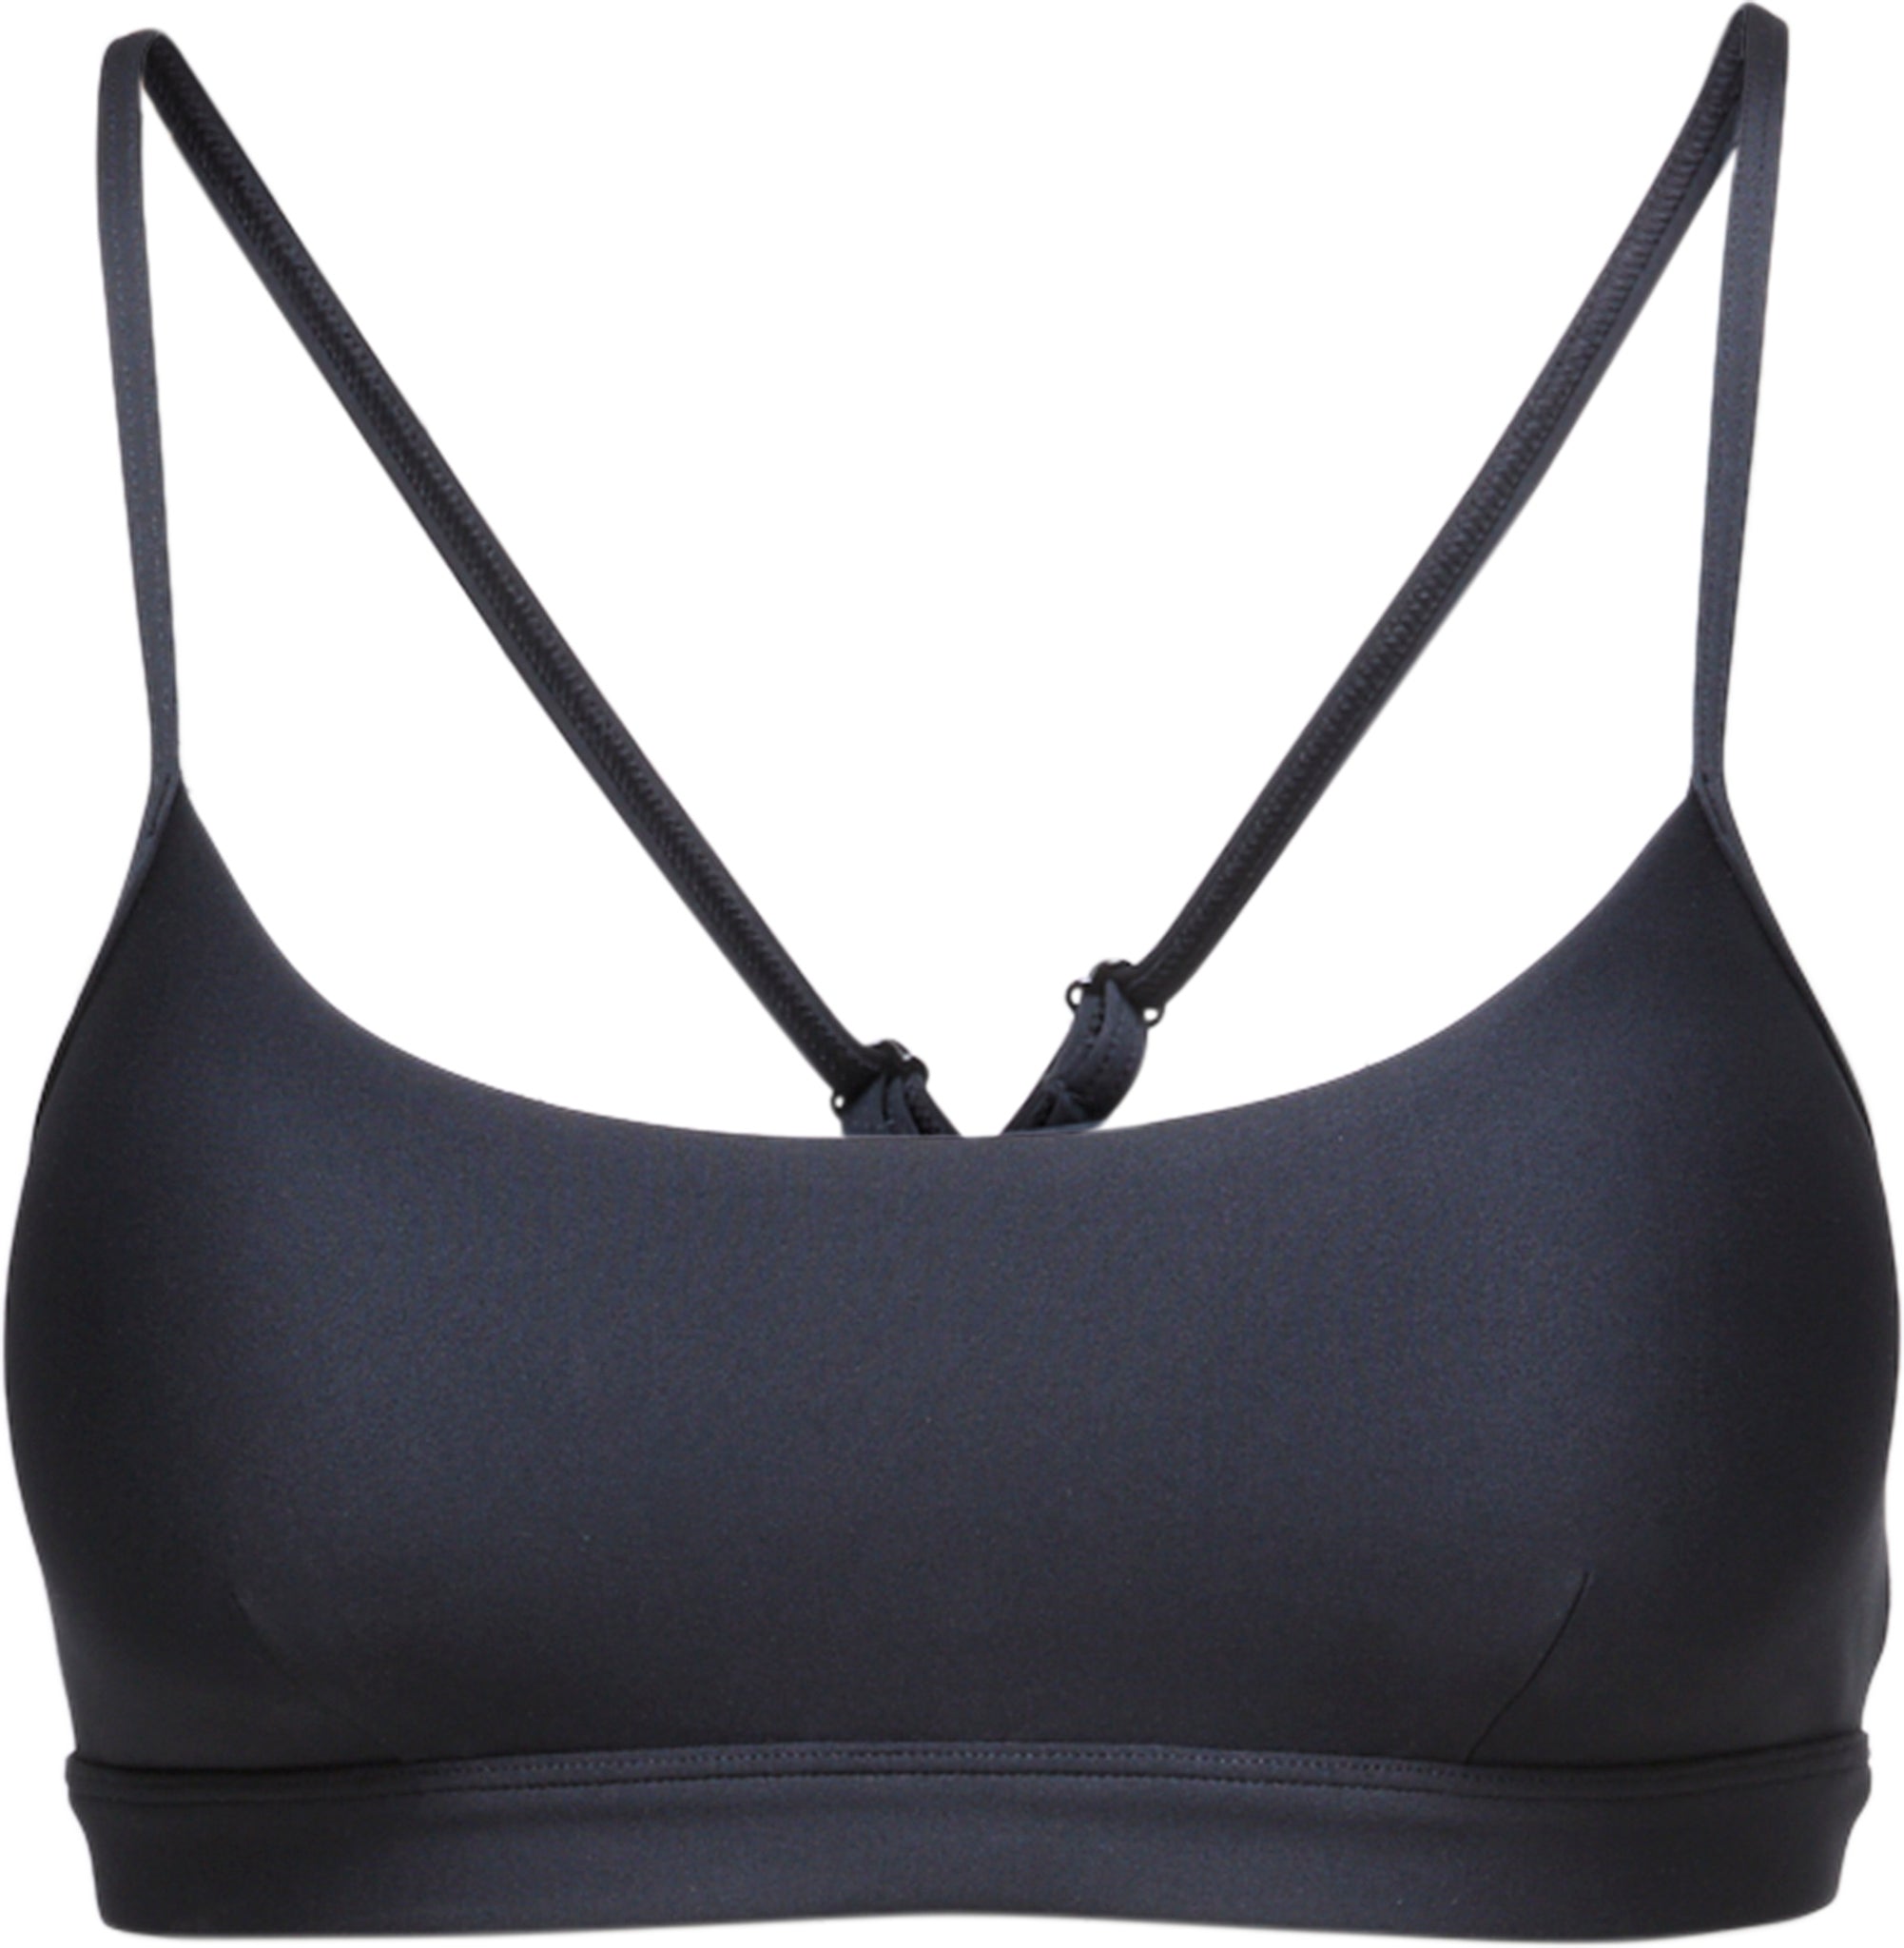 Alo Yoga, Airlift Intrigue Bra - Black